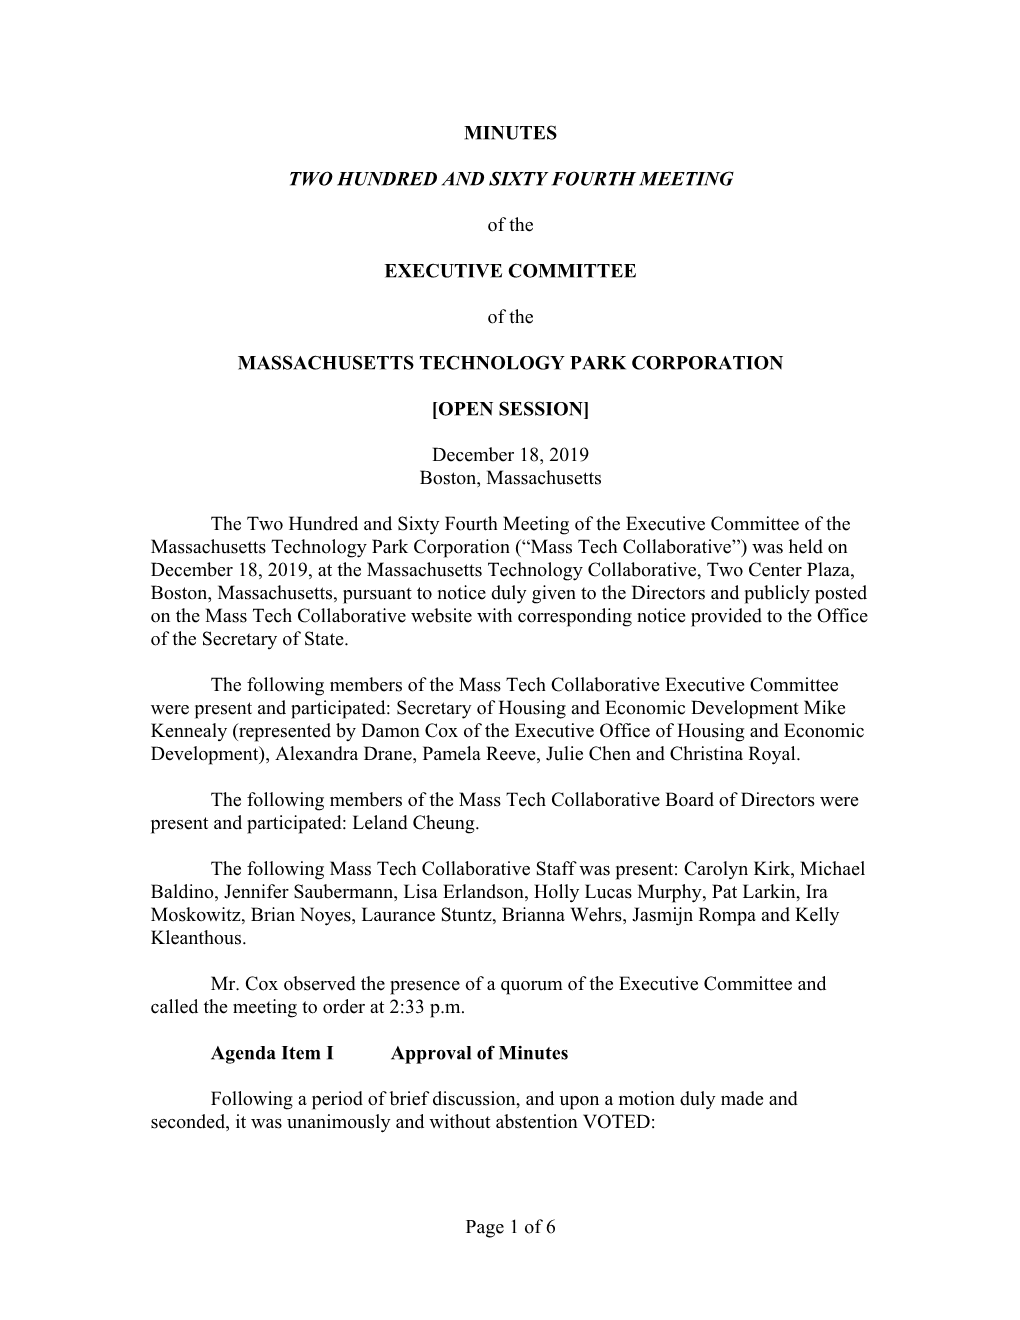 Draft Minutes of the Two Hundred and Sixty Third Meeting of the Executive Committee, Held on November 6, 2019, in Boston Massachusetts As the Formal Minutes Thereof